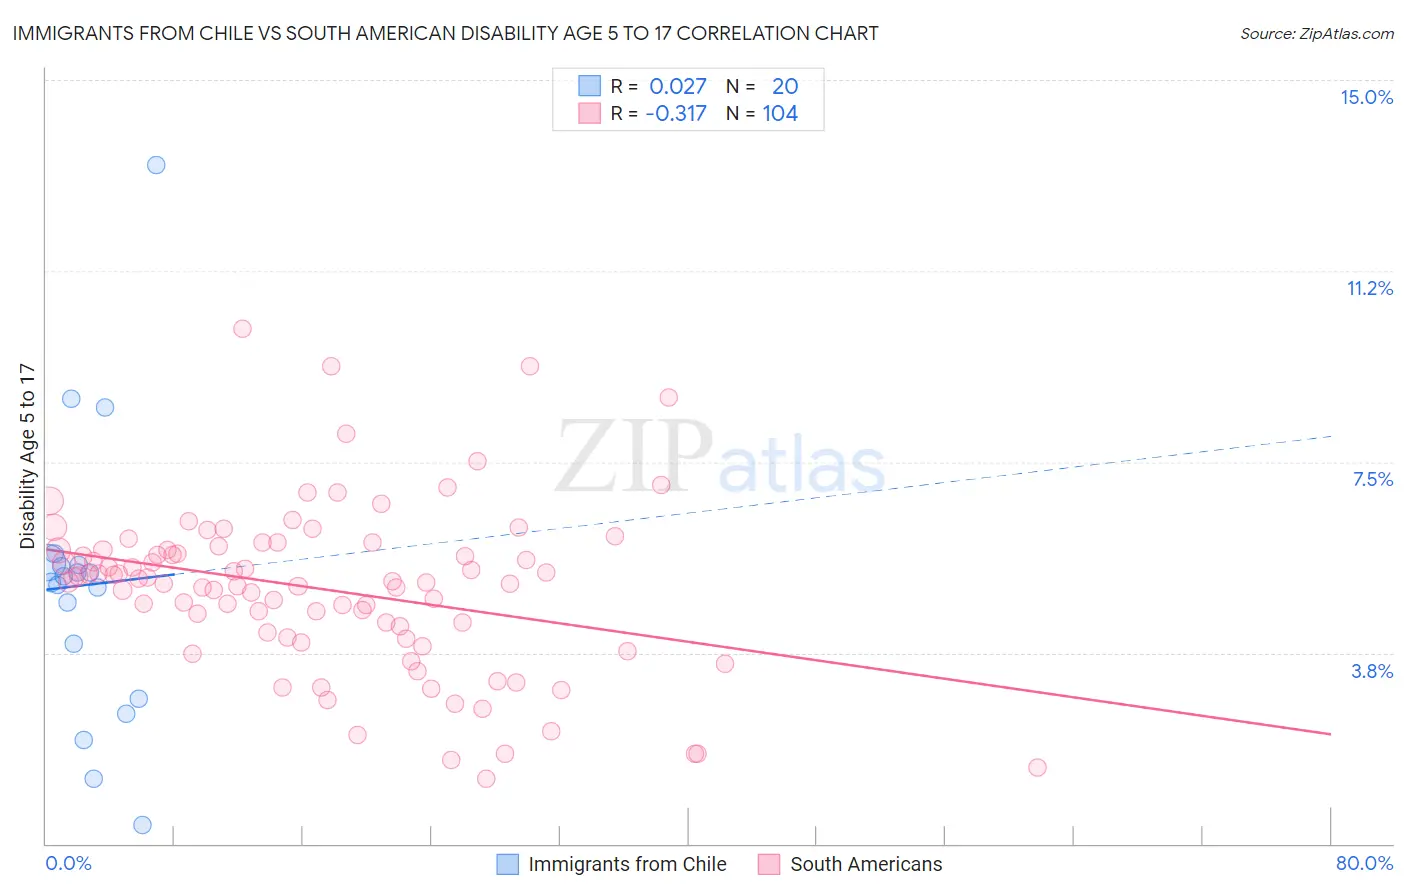 Immigrants from Chile vs South American Disability Age 5 to 17